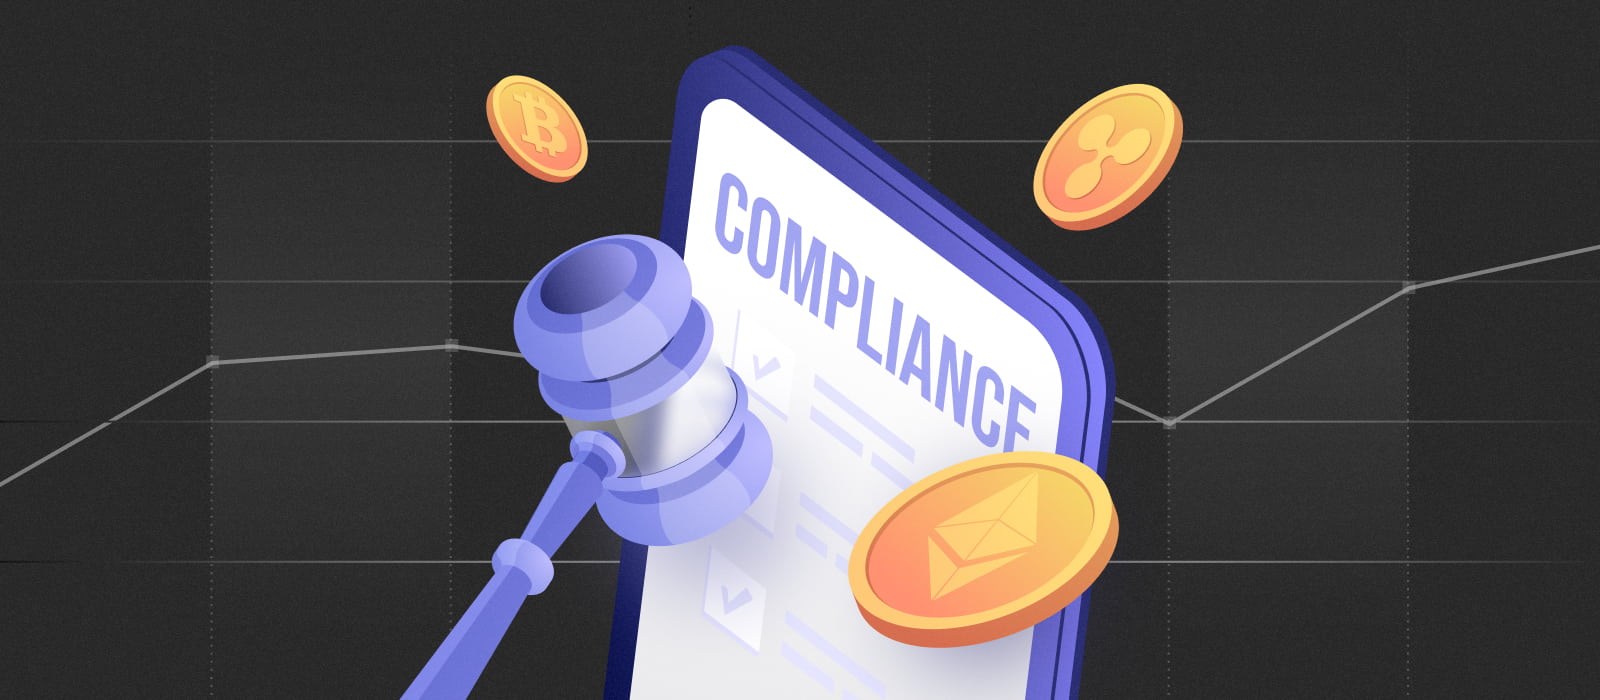 'compliance' written on a notebook, a gavel and altcoin